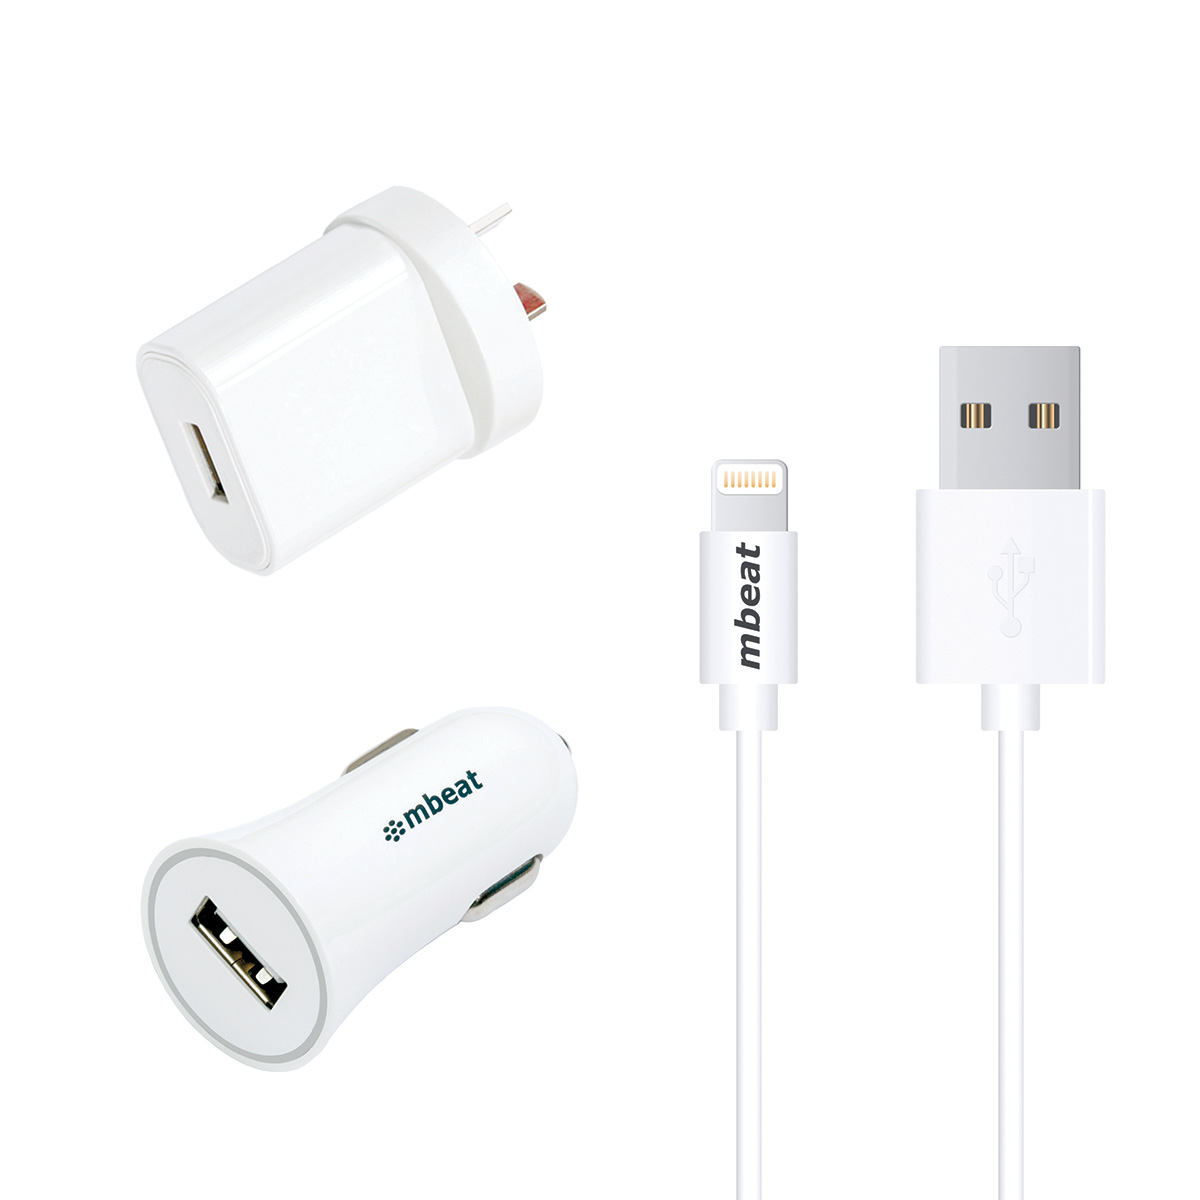 mbeat 3-in-1 MFI USB Lightning Charging Kit (1m Lighting to USB Cable + 2.1A Car & Wall Charger)